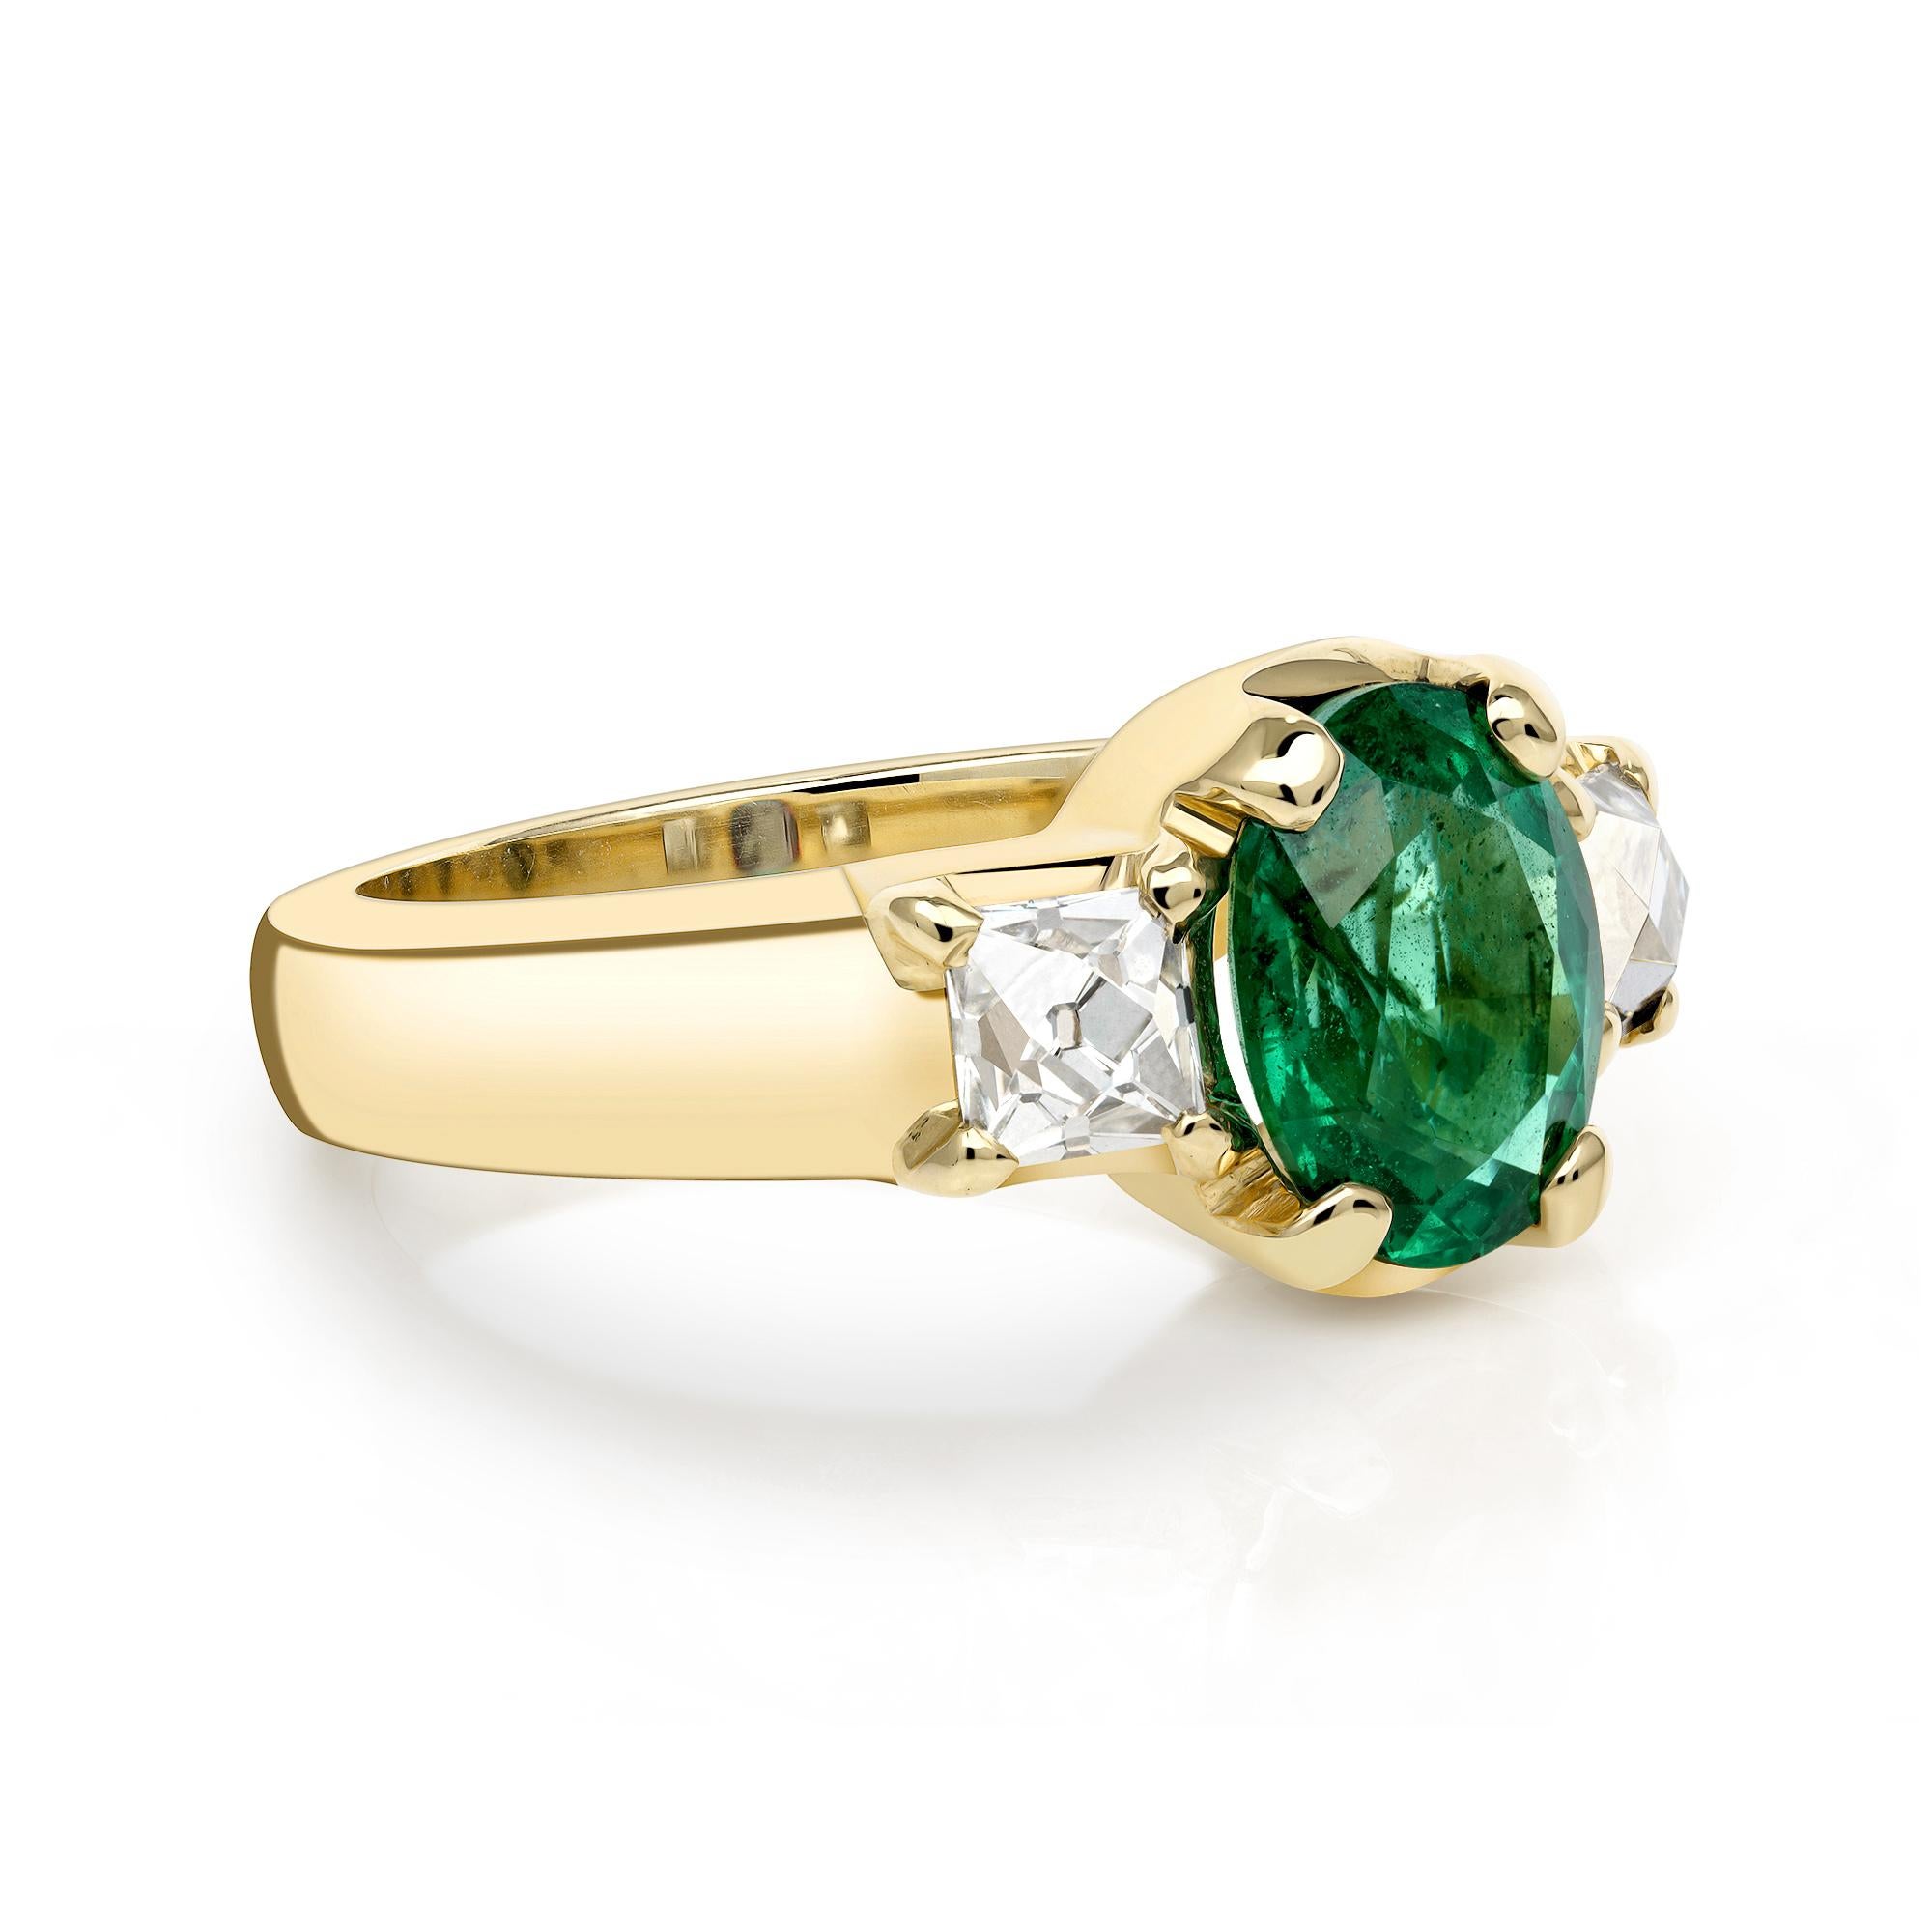 1.73ct GIA certified Zambian Oval cut green emerald flanked by 0.84ctw French cut diamonds prong set in a handcrafted 18K yellow gold mounting.